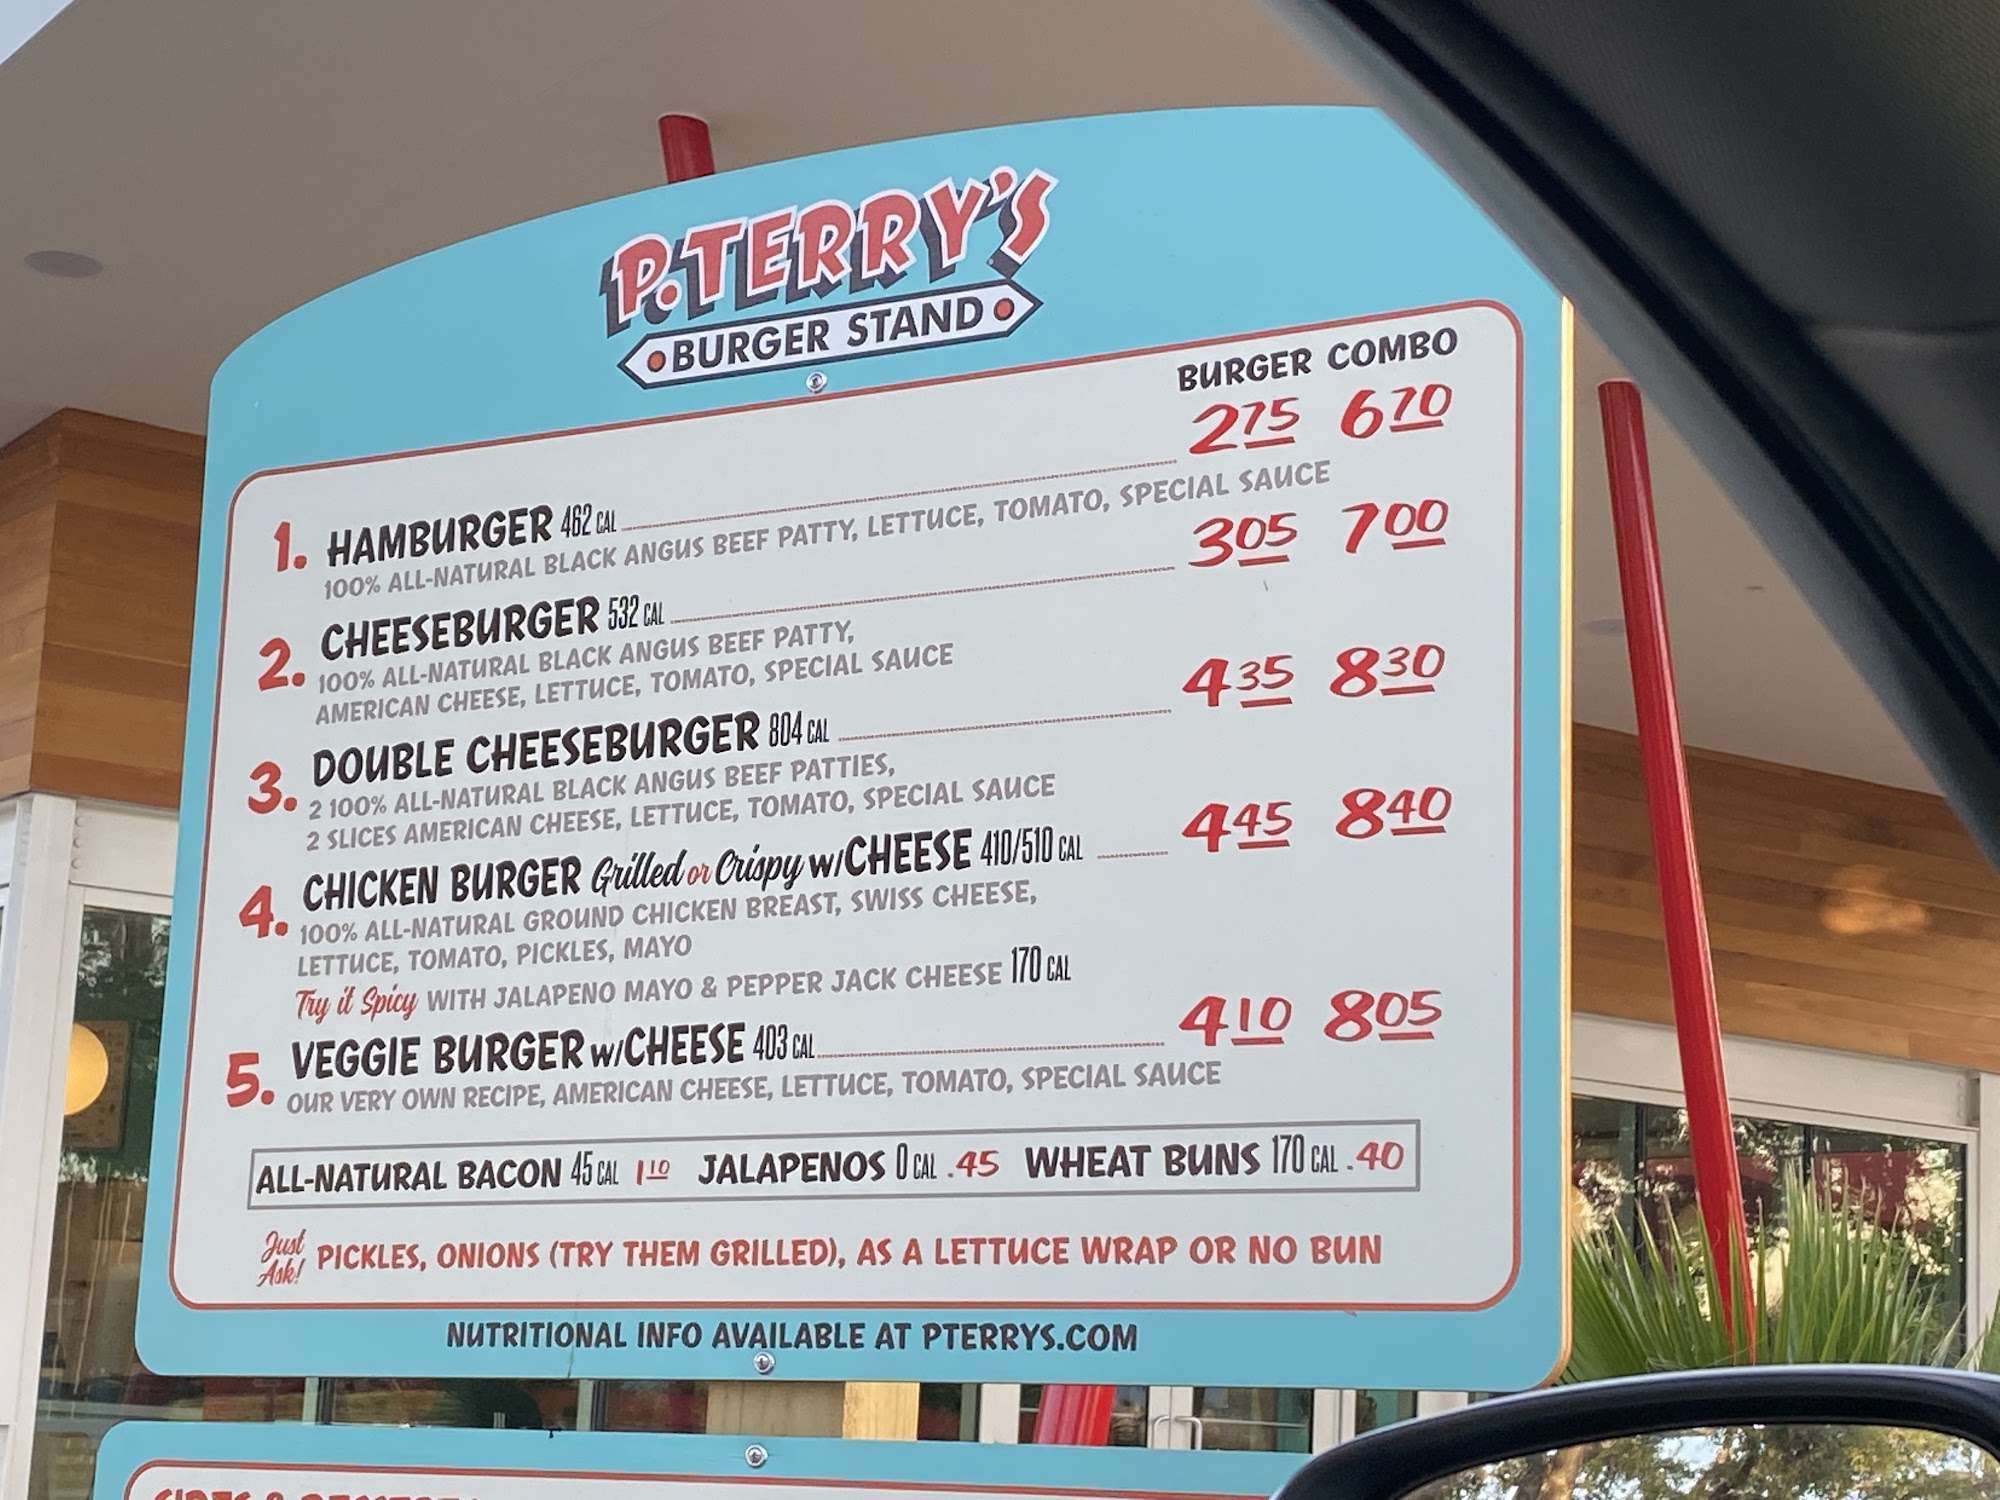 P. Terry's Burger Stand #25